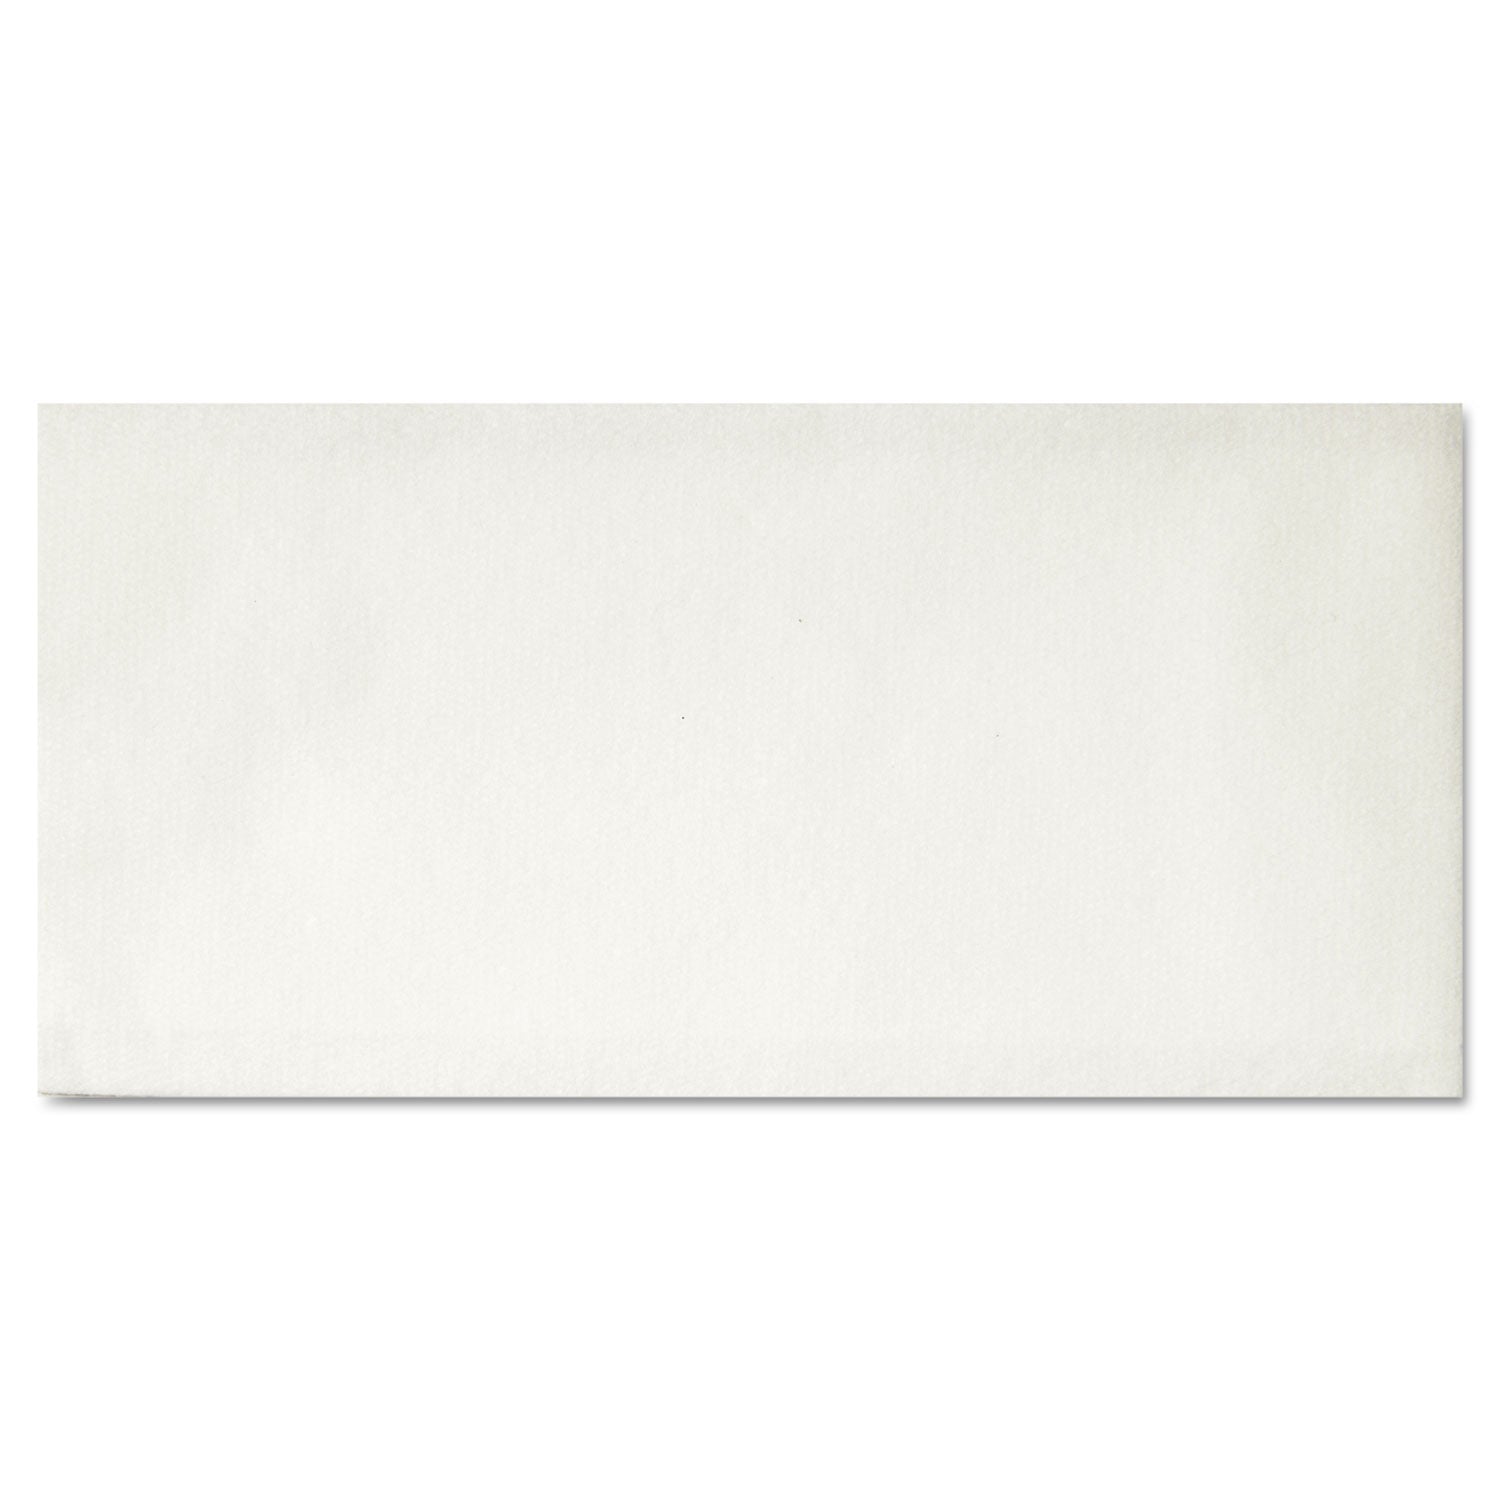 Linen-Like Guest Towels, 1-Ply, 12 x 17, White, 125 Towels/Pack, 4 Packs/Carton - 